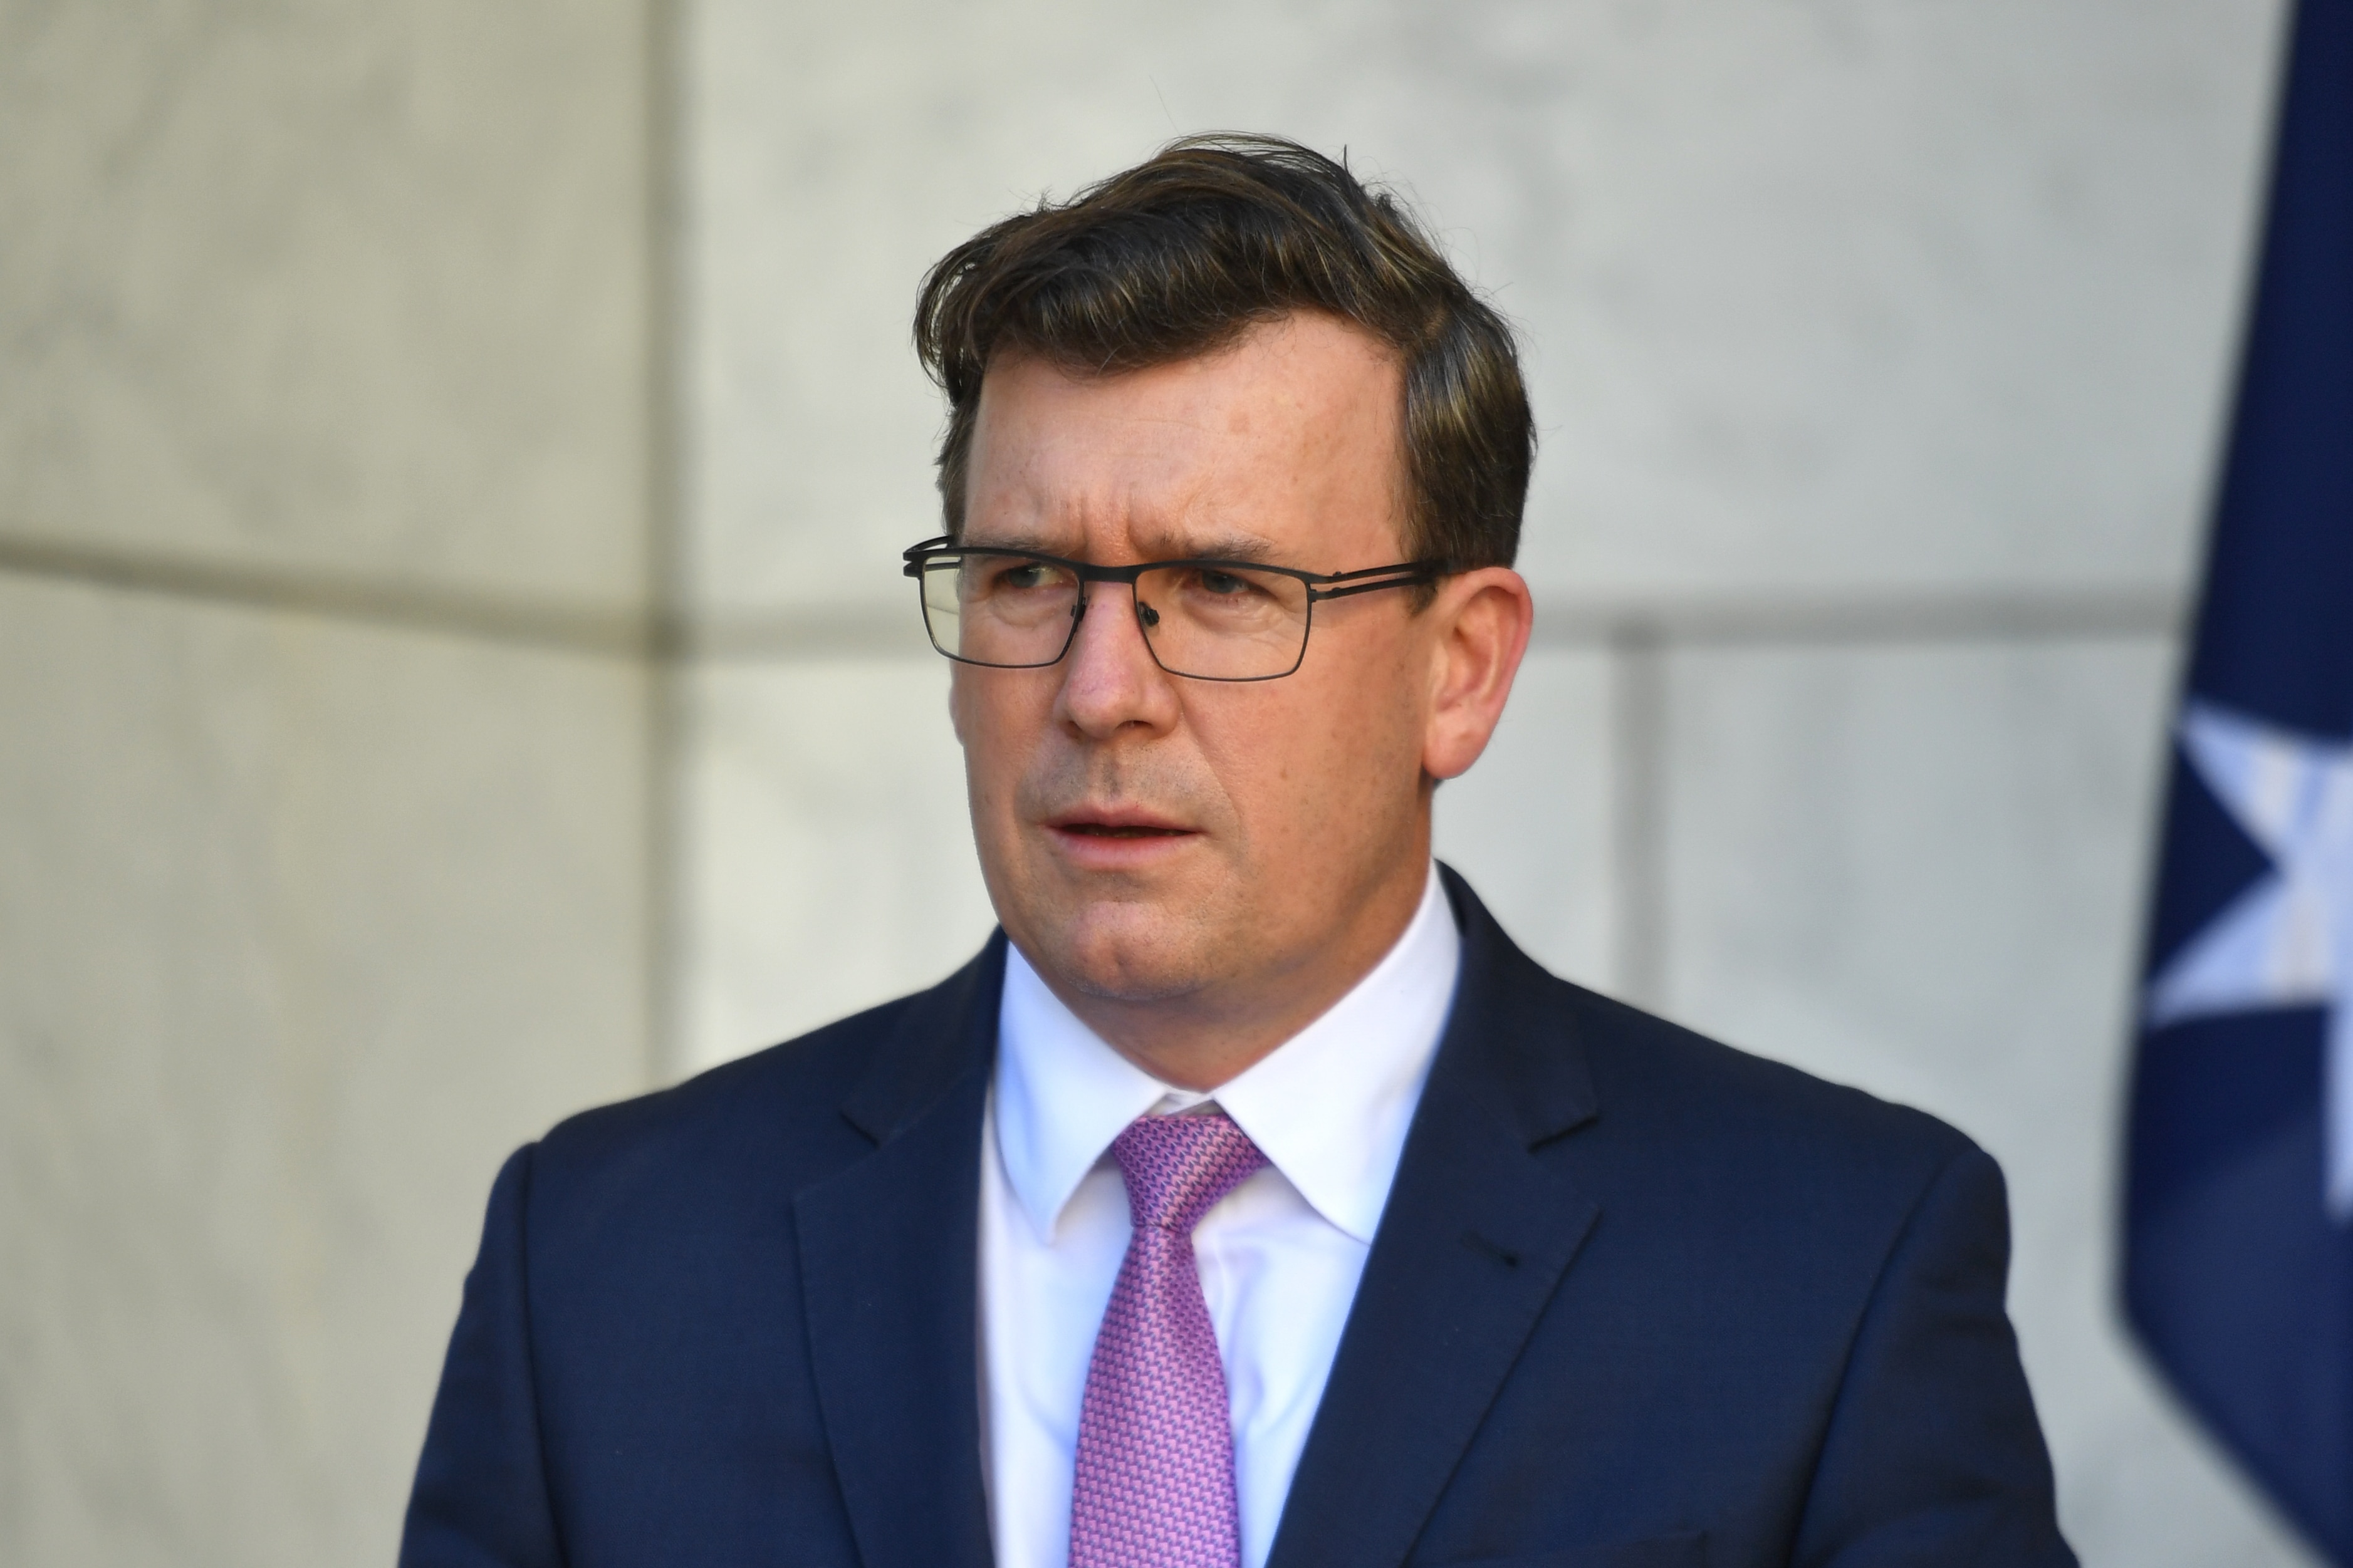 Acting Immigration Minister Alan Tudge at a press conference at Parliament House in Canberra.